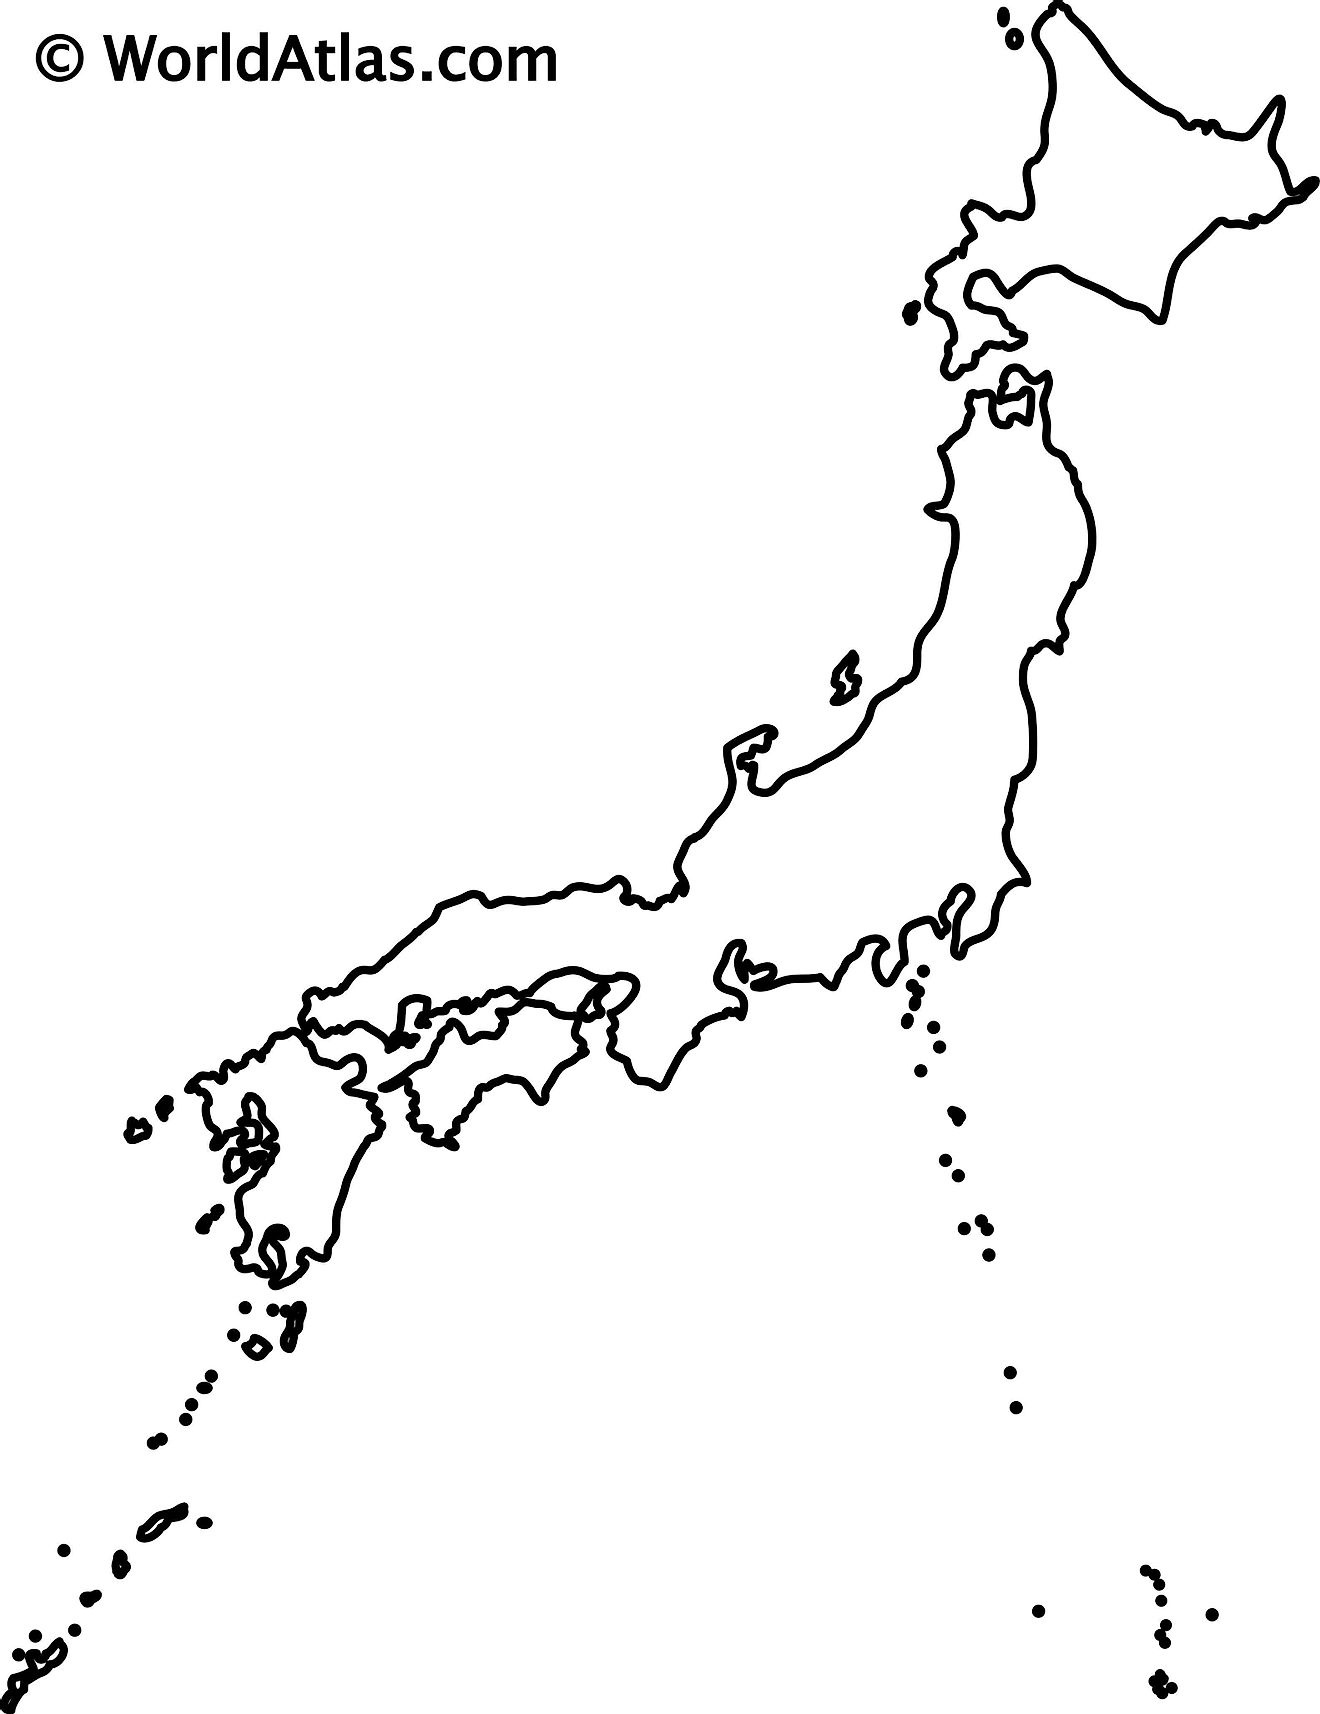 Blank Outline Map of Japan